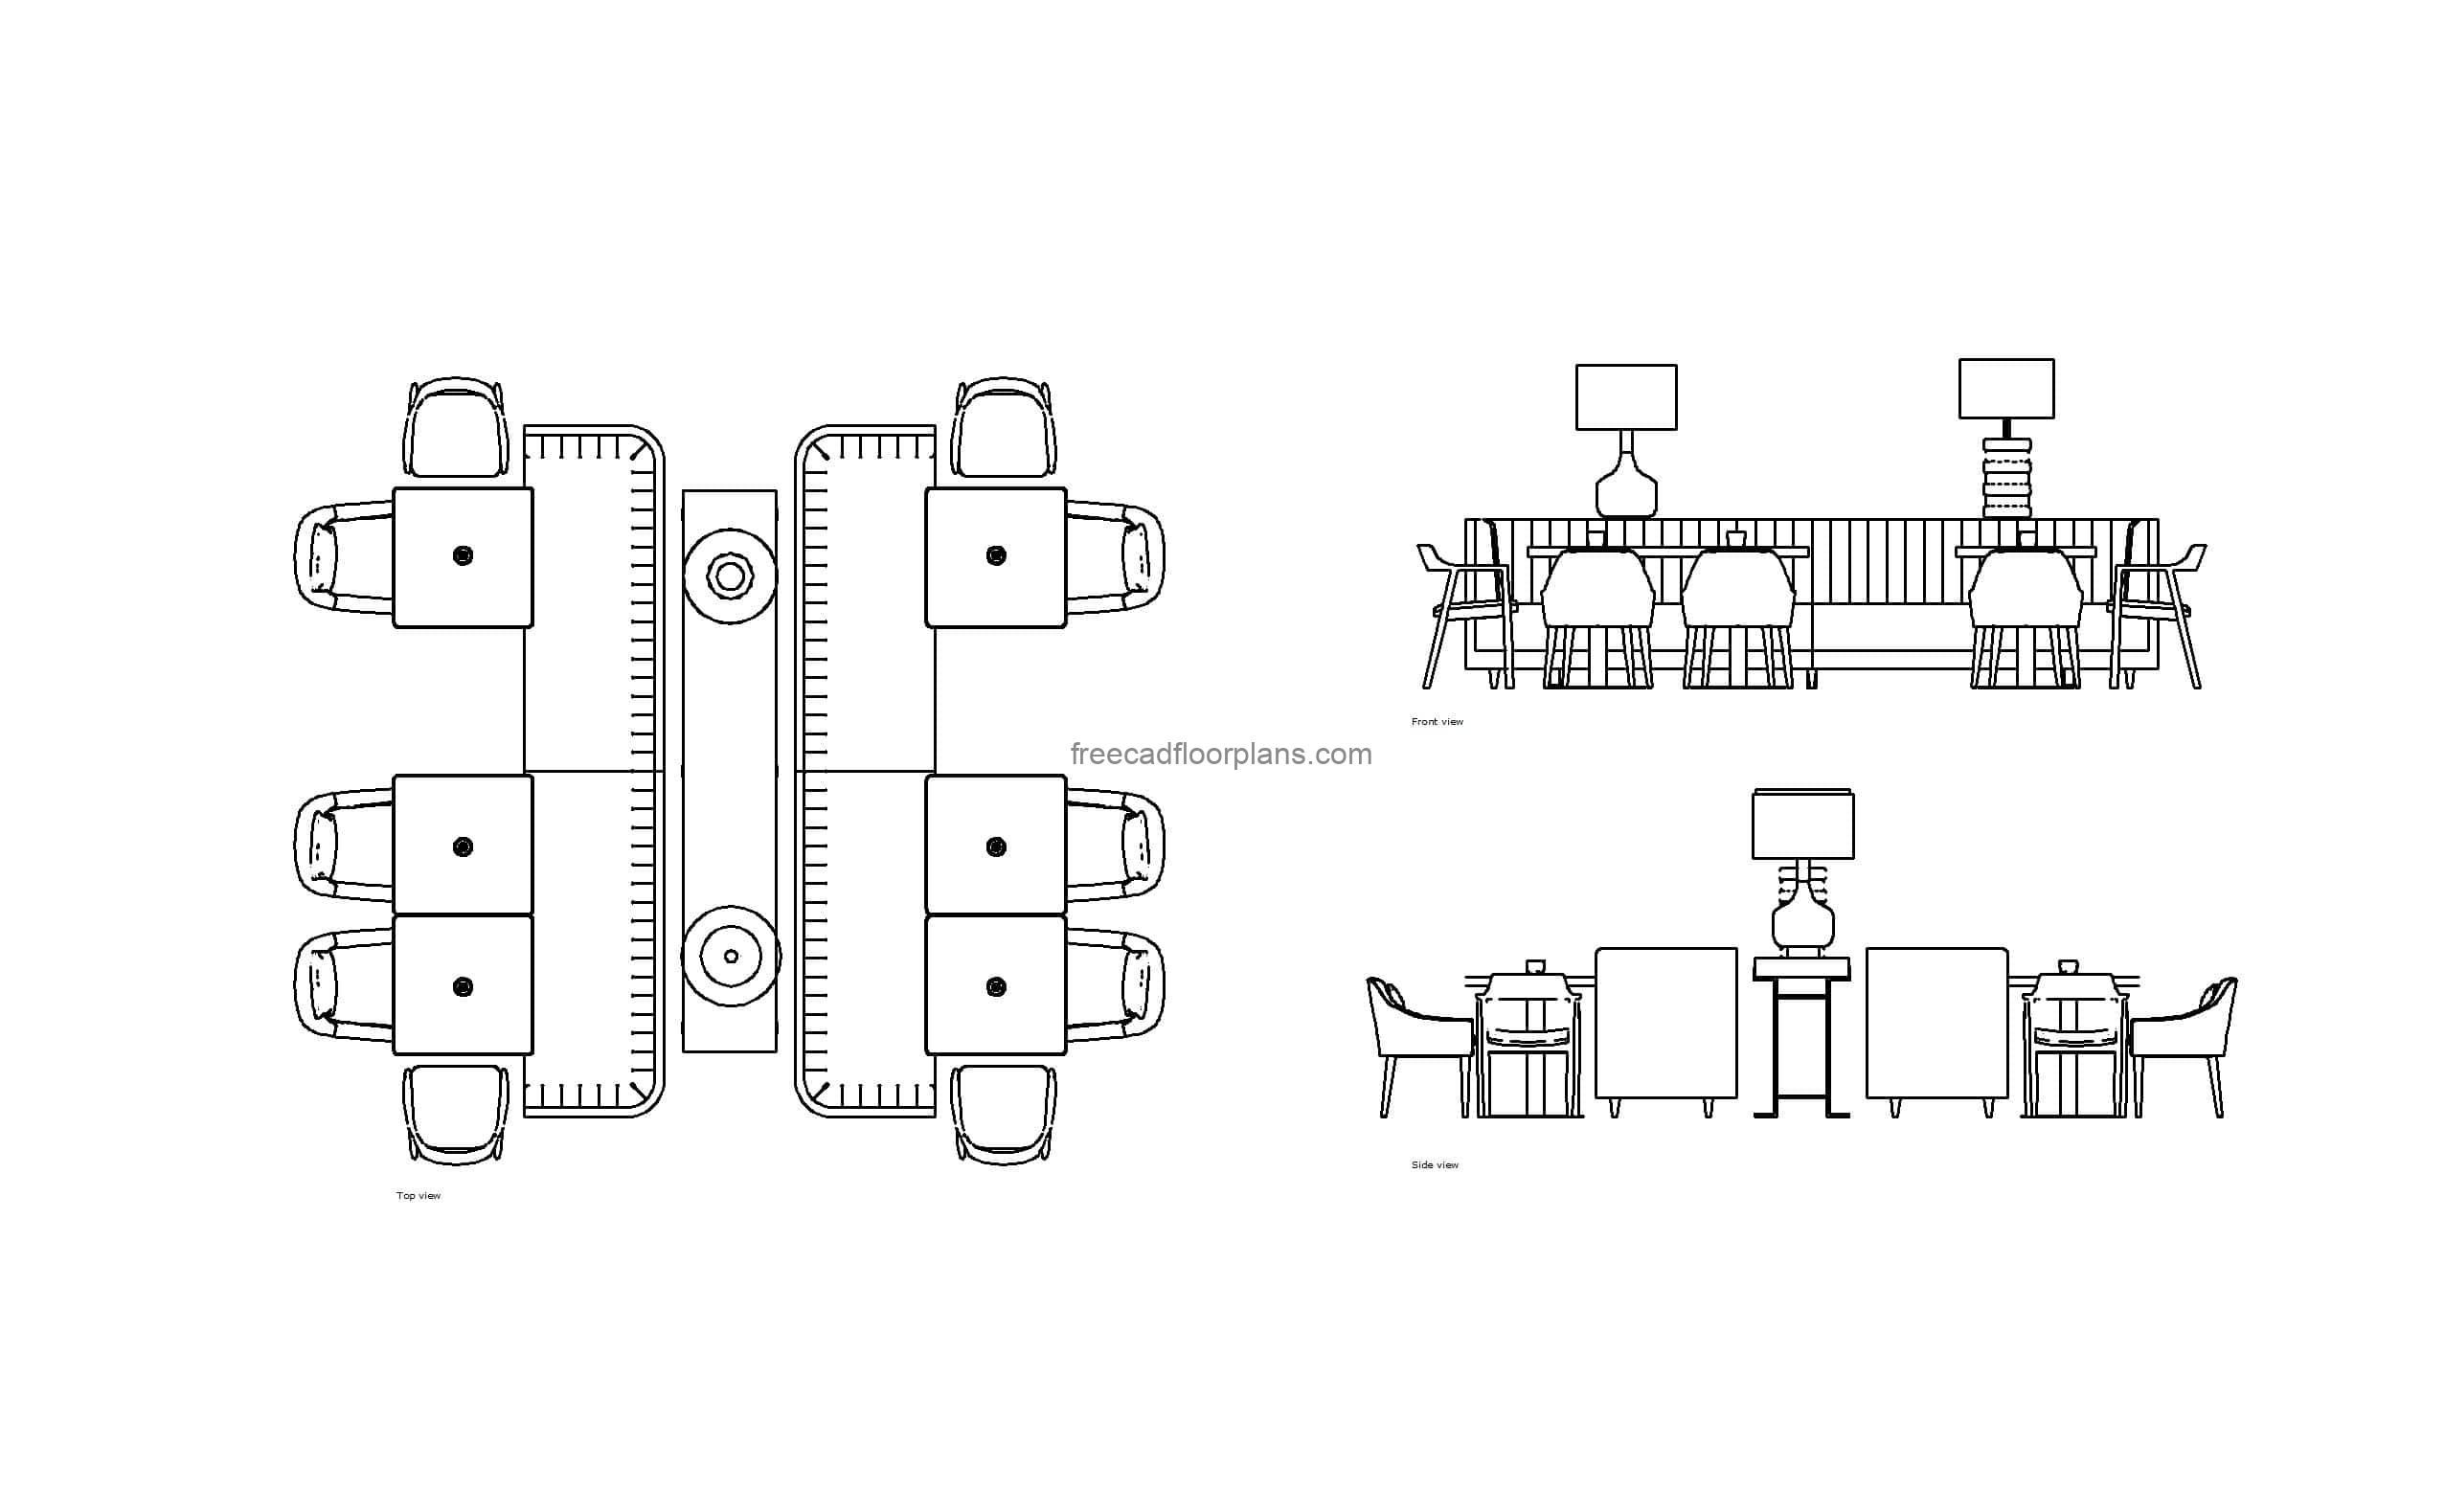 autocad drawing of a luxury banquette set, plan and elevation 2d views, dwg file free for download